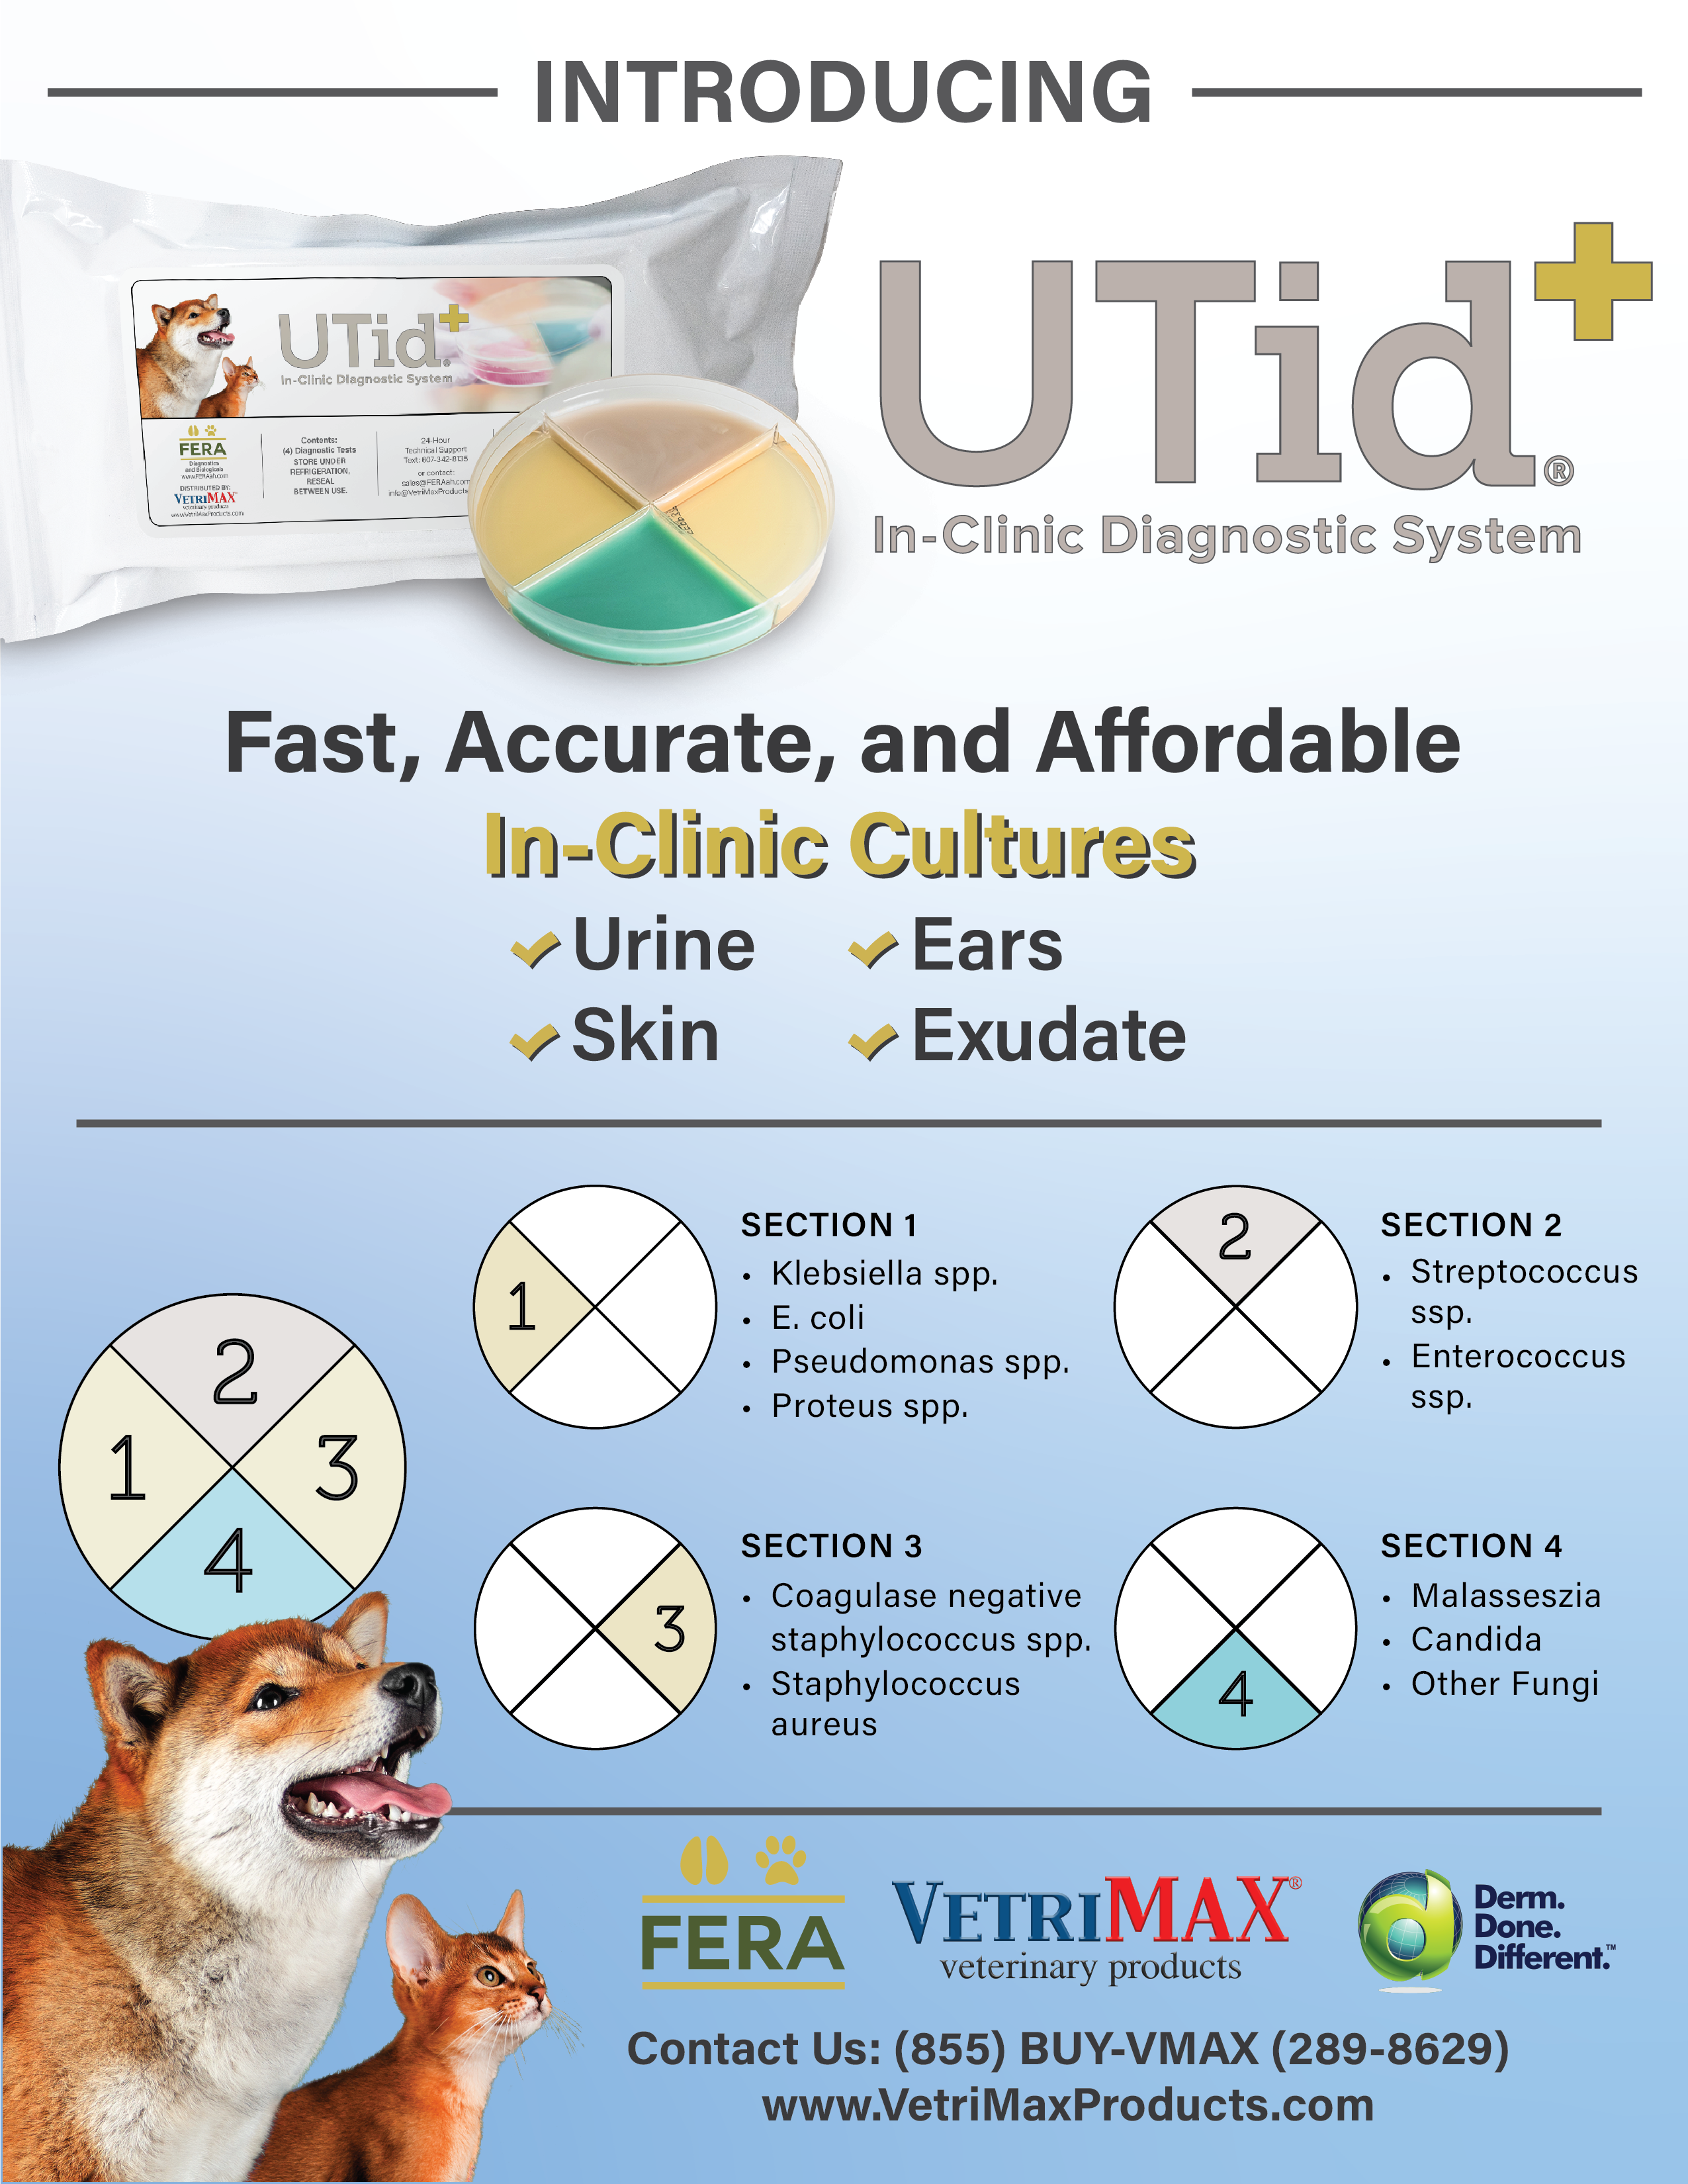 UTid+® In-Clinic Diagnostic System (4CT/PACK)